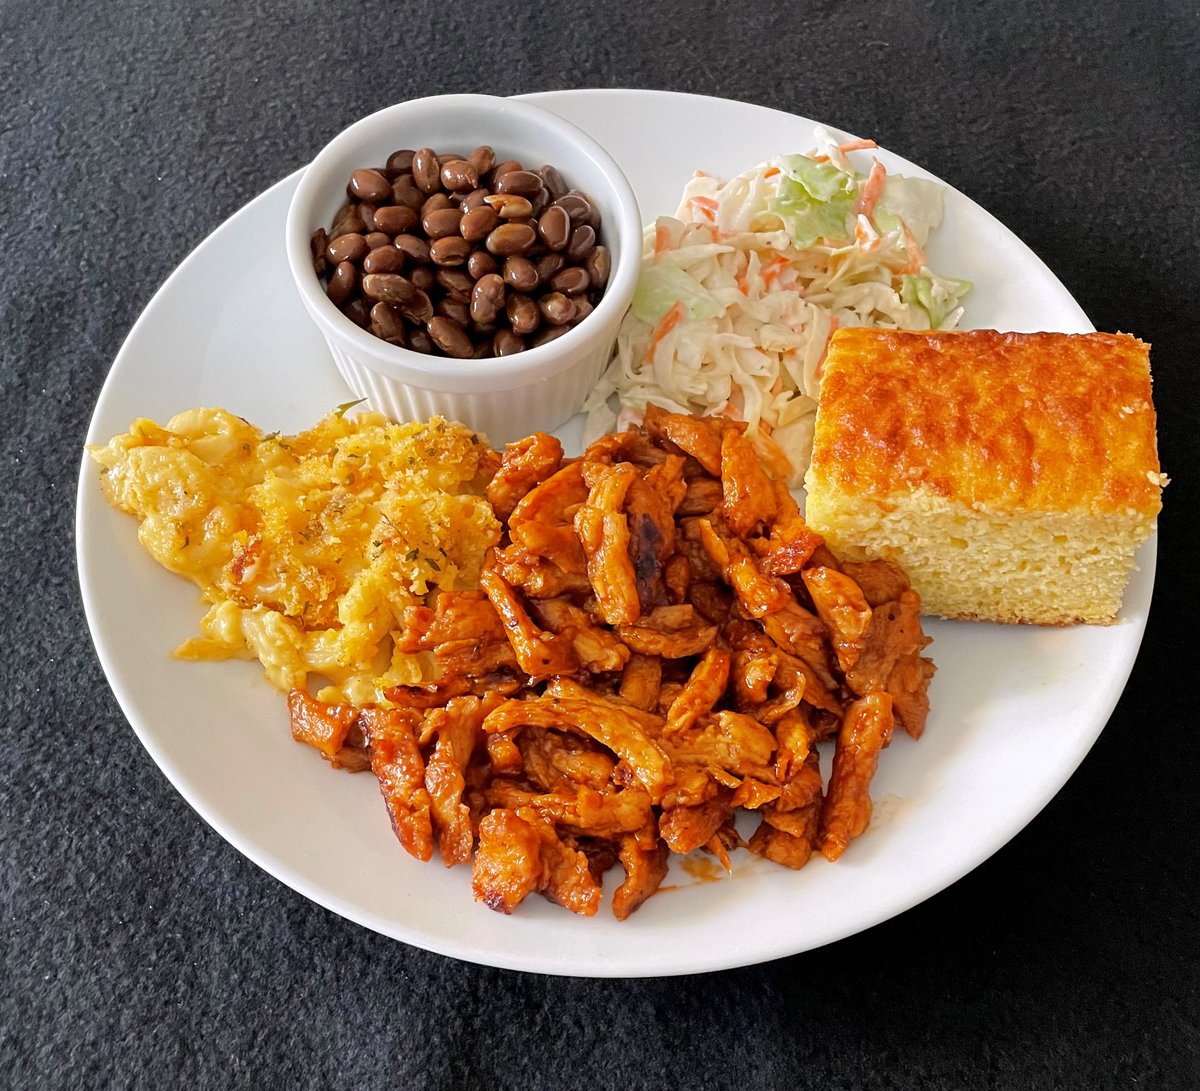 Image of BBQ Soy Curl Dinner Saturday May 4th 5:30pm - 6pm Pick Up